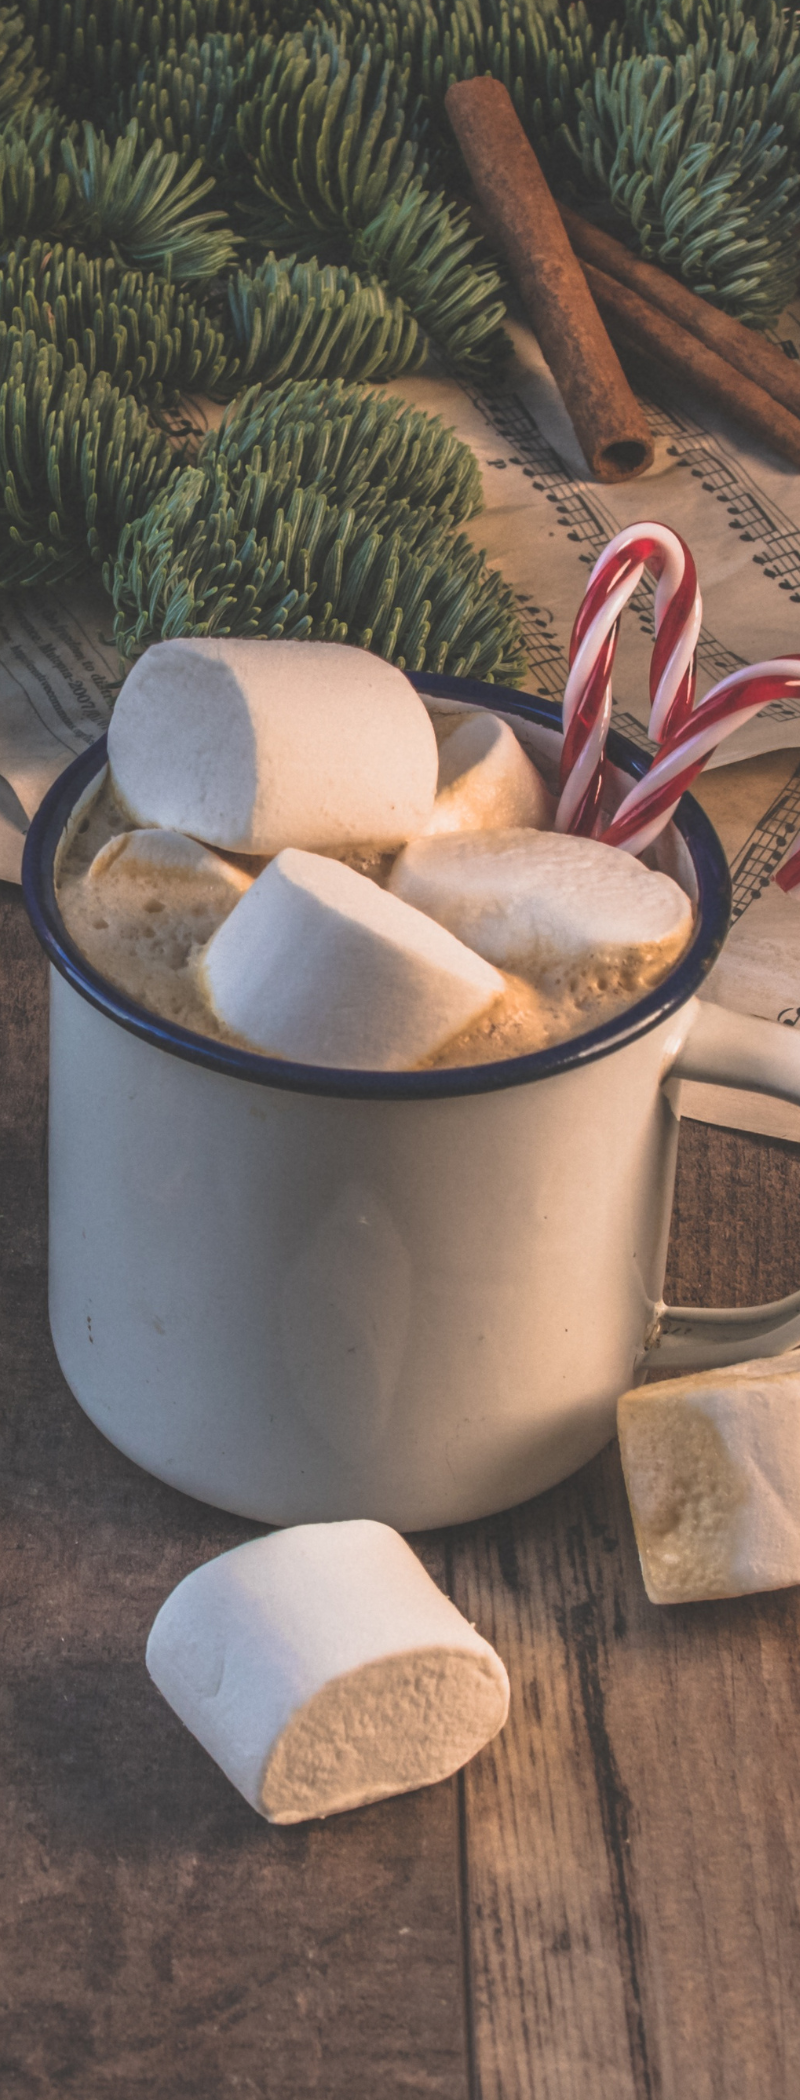 8 Engaging ChatGPT Prompts for Small Businesses During the Festive Season, hot chocolate, Christmas